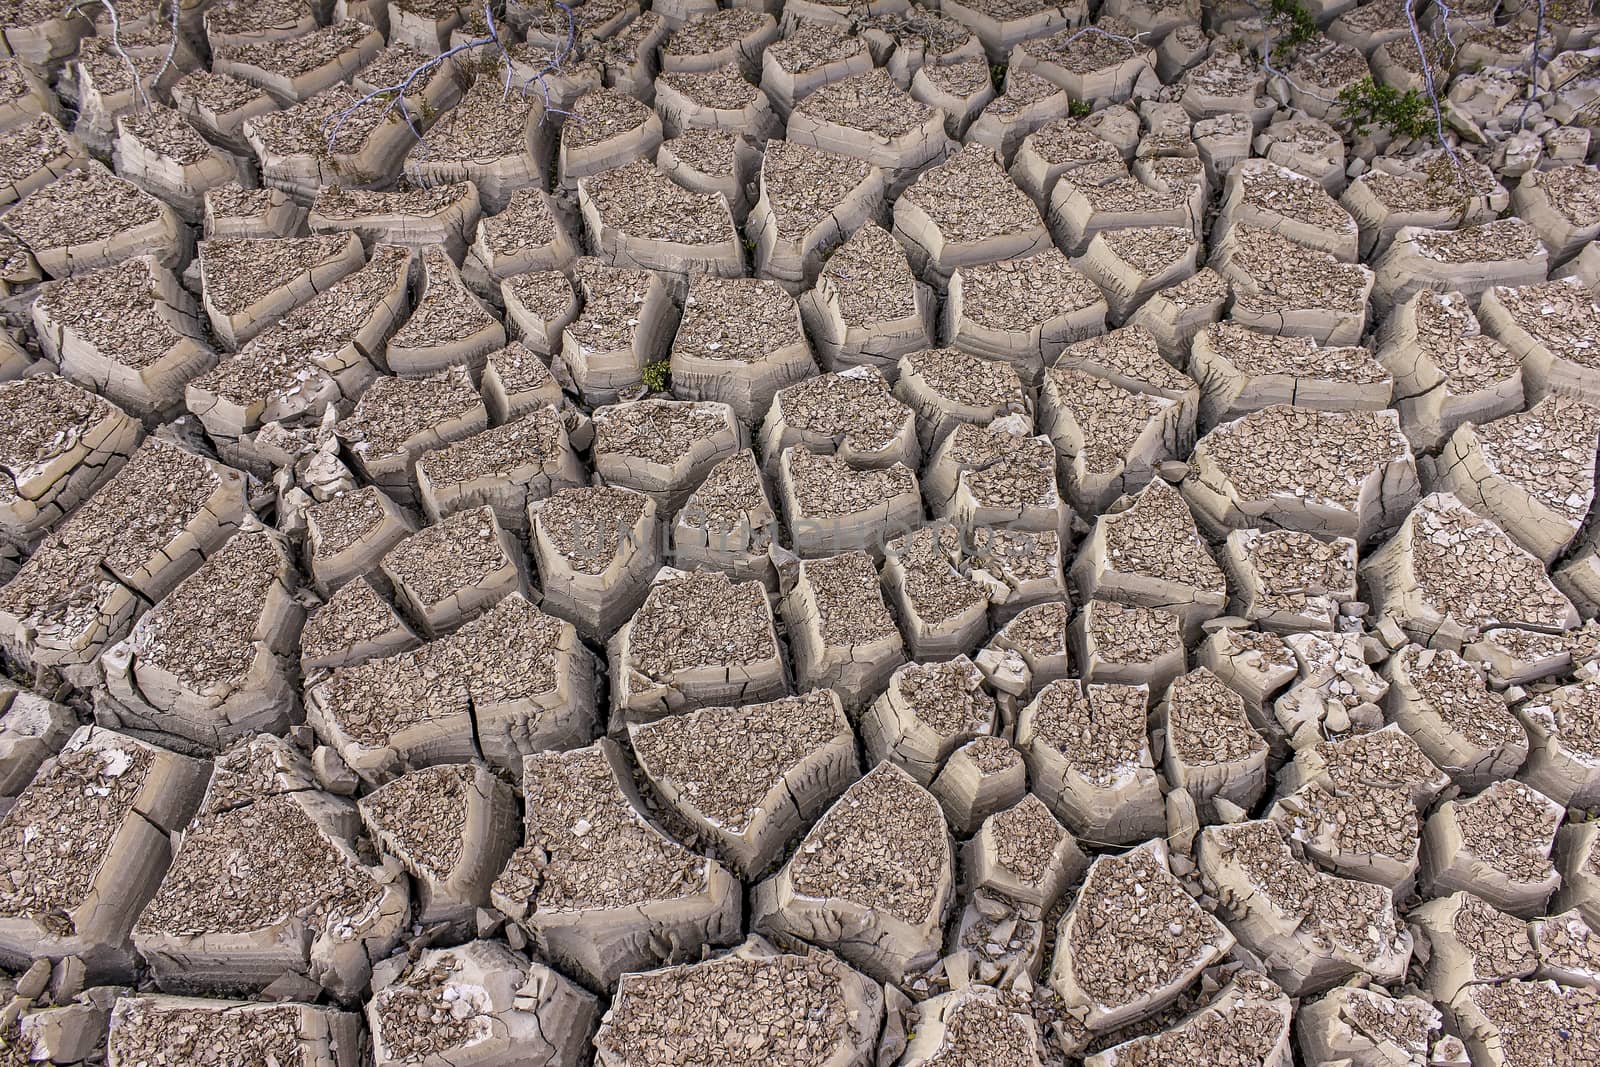 An image of severely dried and cracked earth that could be a dried river or lake bed, or in the desert